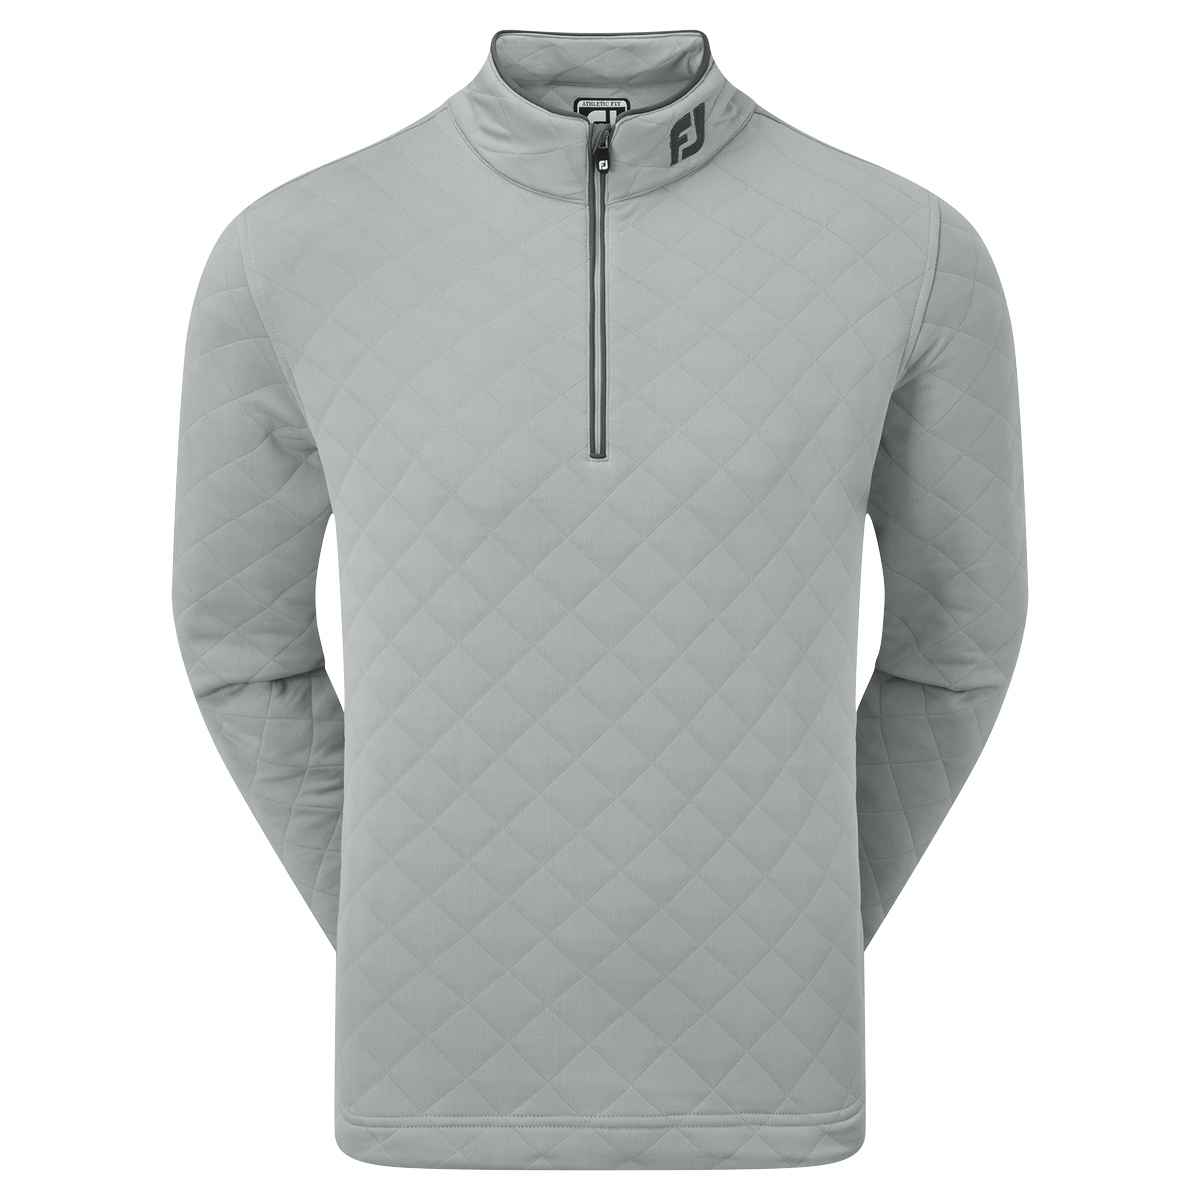 FootJoy Mens Diamond Jacquard Chill-Out Golf Mid-Layer Pullover  - Grey/Charcoal